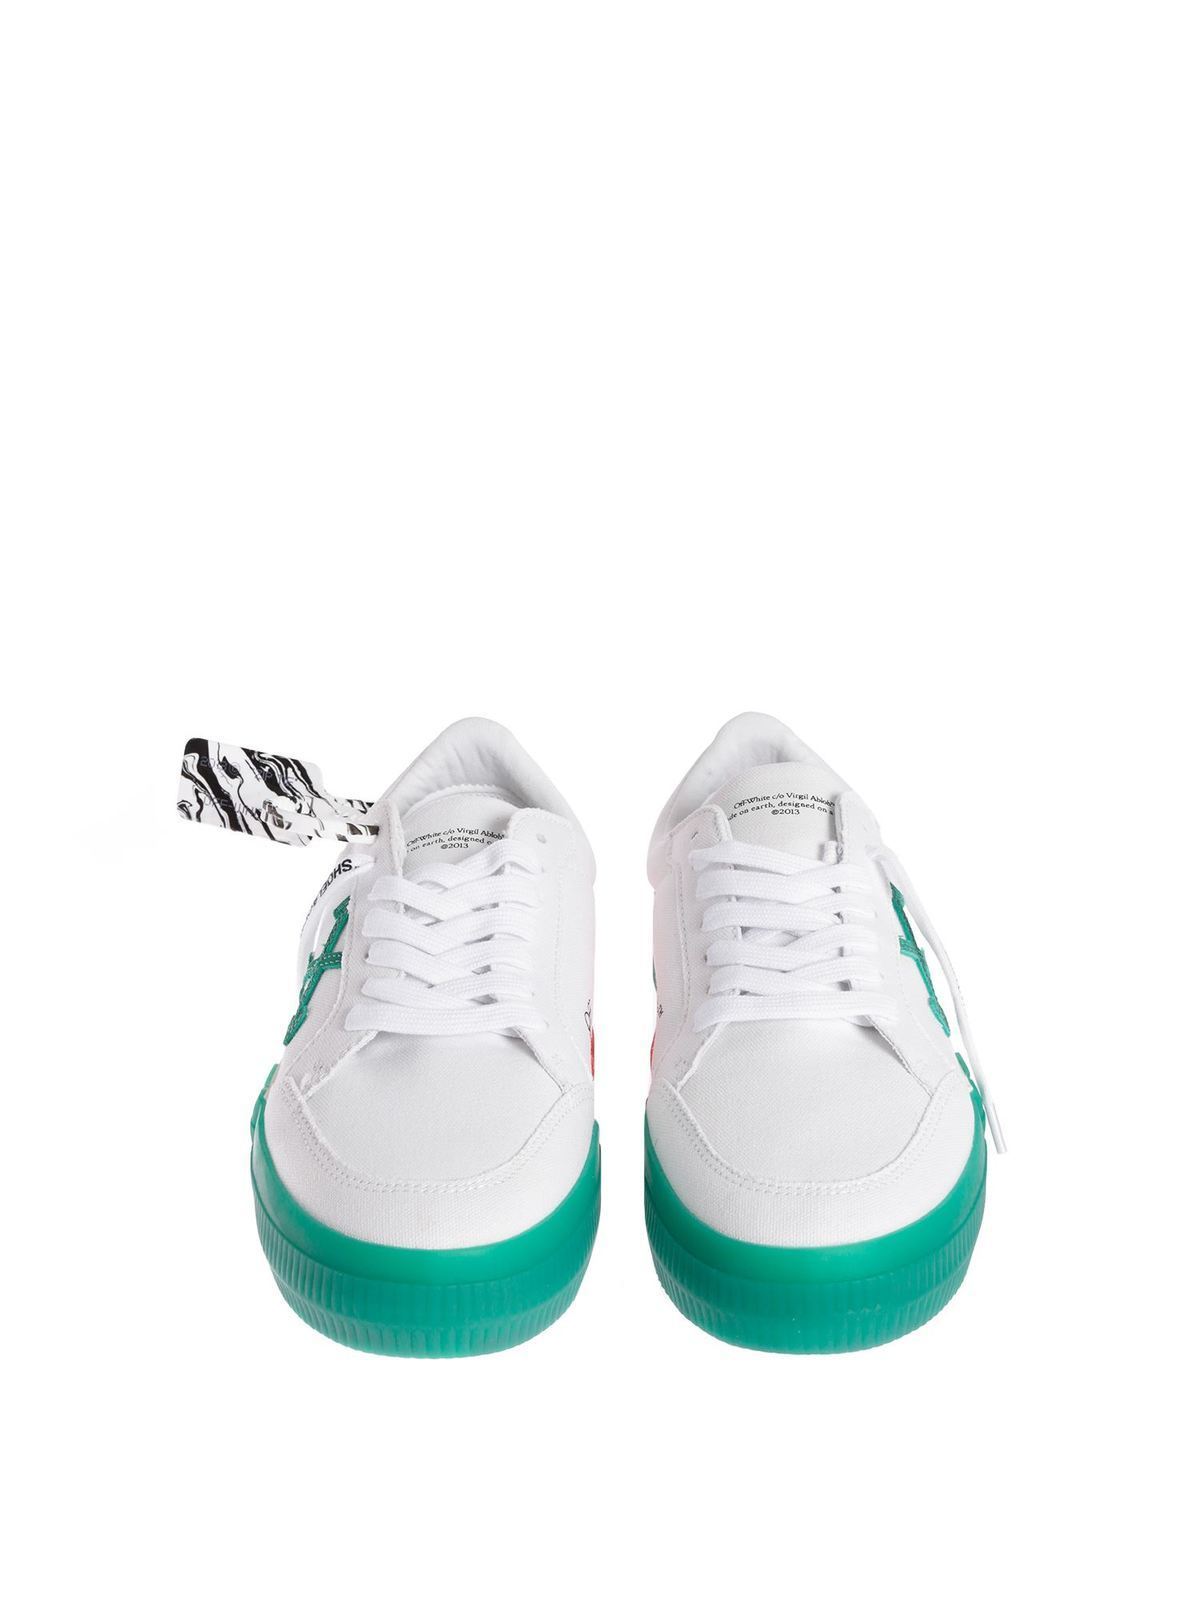 green and white tennis shoes